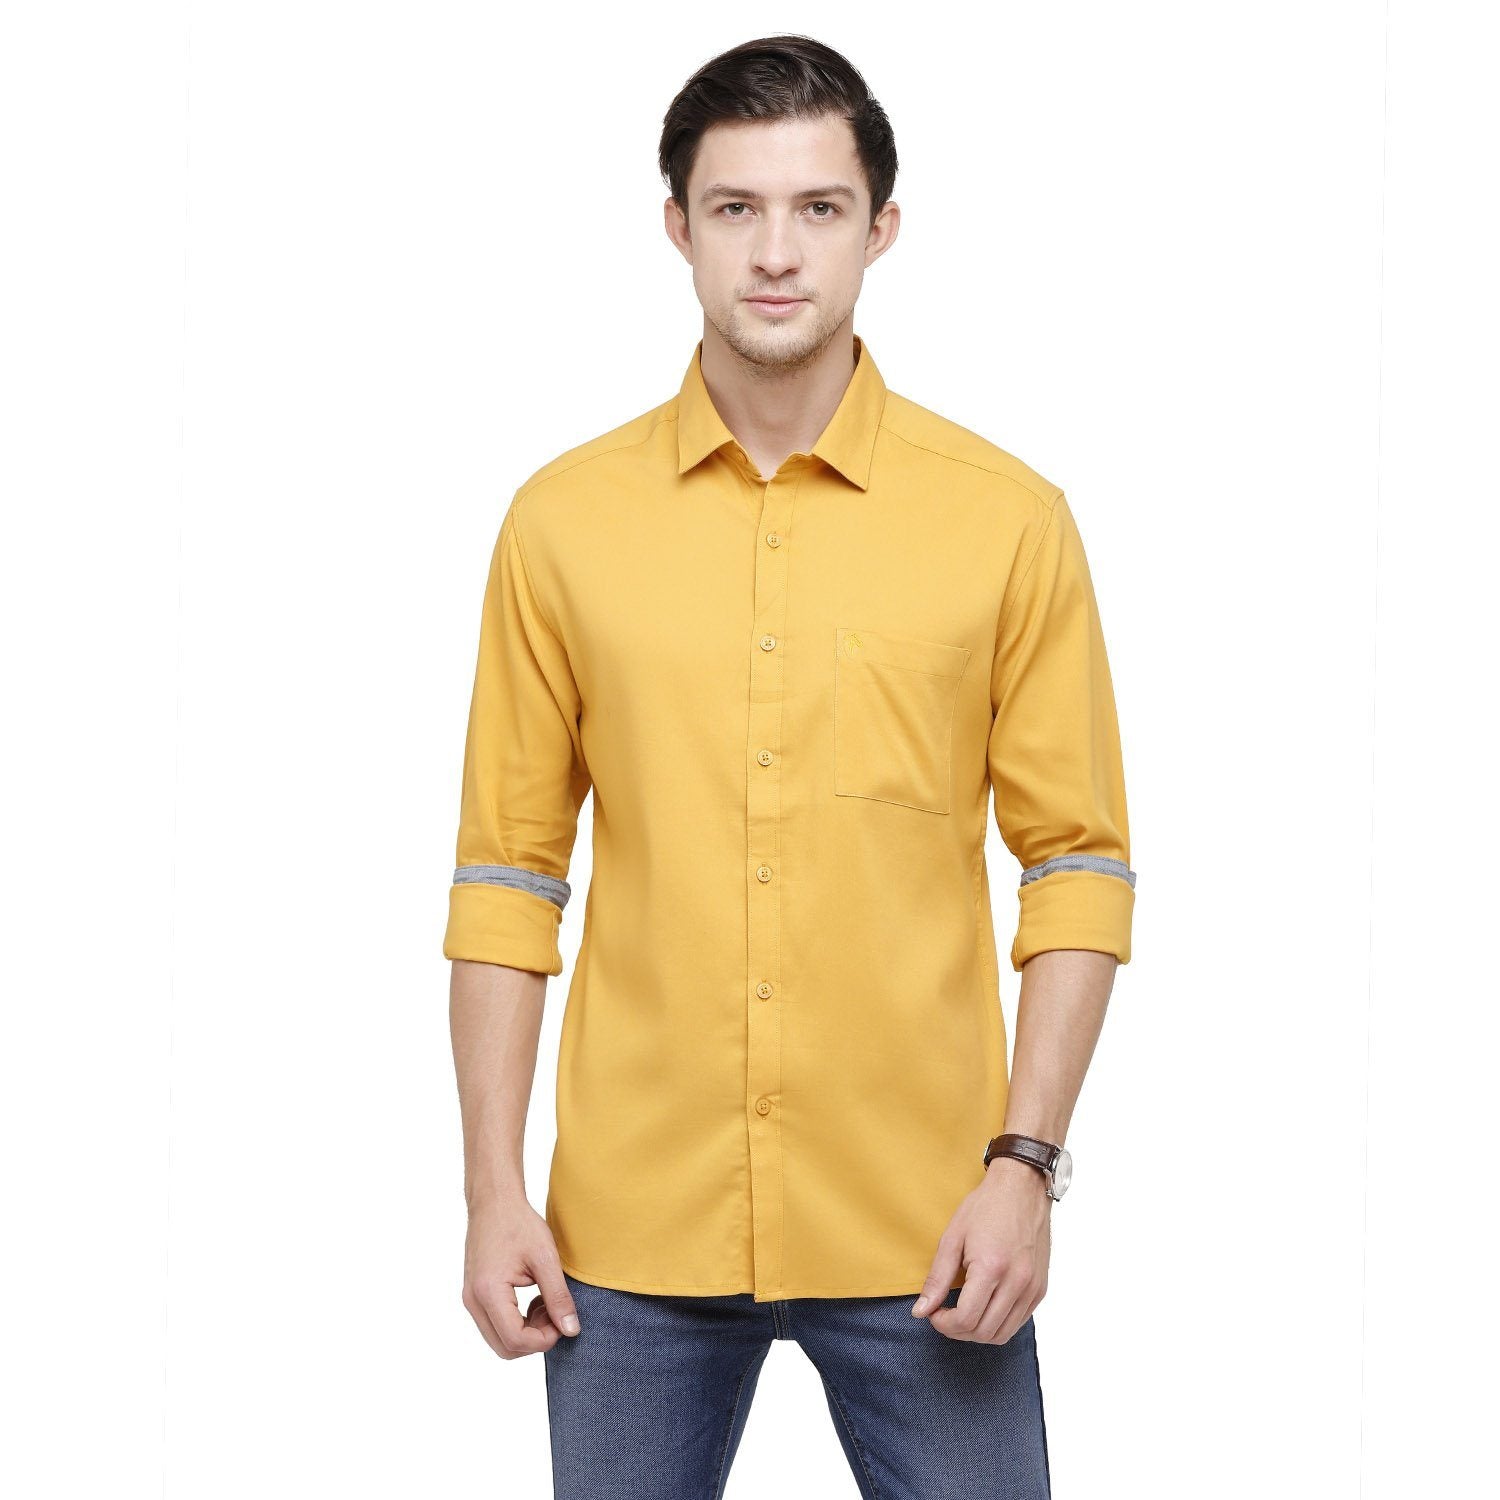 Swiss Club Mens Solid Collar Neck Full Sleeve Slim Fit Cotton Blended Yellow Fashion Woven Shirt ( S-SC-78 A-FS-SLD-SF ) Shirts Swiss Club 